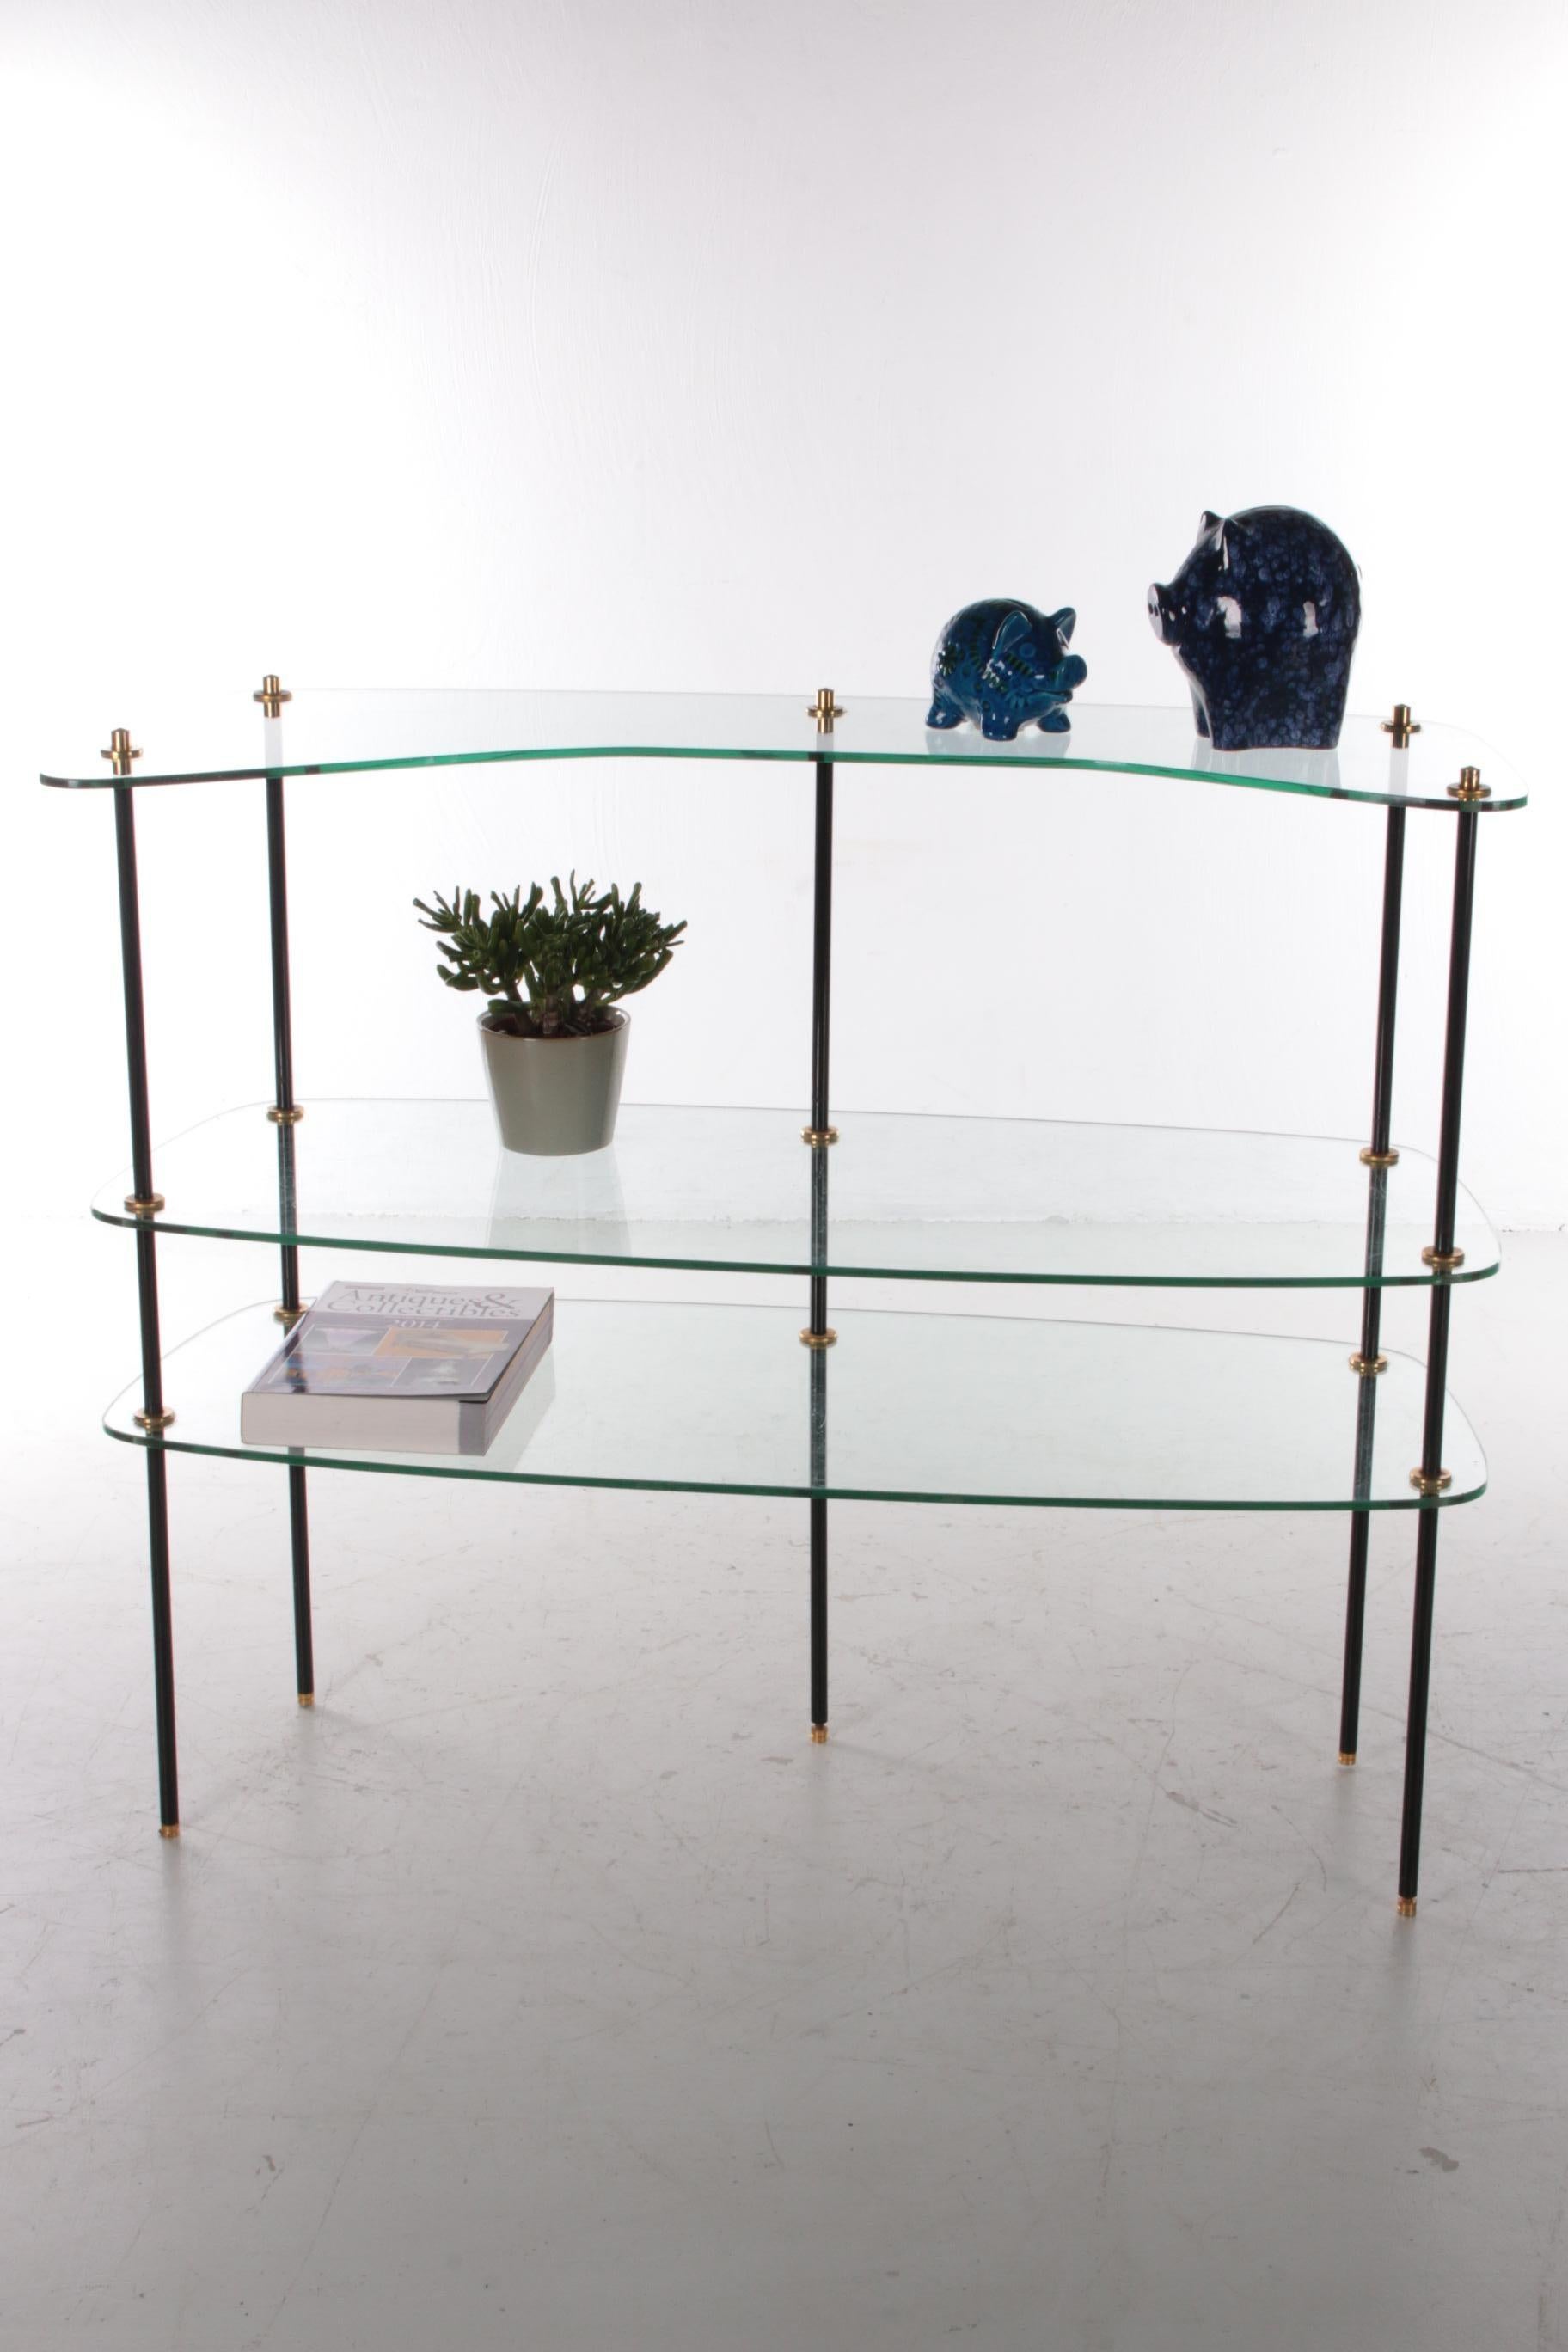 Vintage beautiful glass wall rack made in France, 1960s


This is a beautiful wall rack or etagère made of glass with brass and metal legs.

Made in France in the 1960s.

This rack stands alone and does not necessarily have to be against a